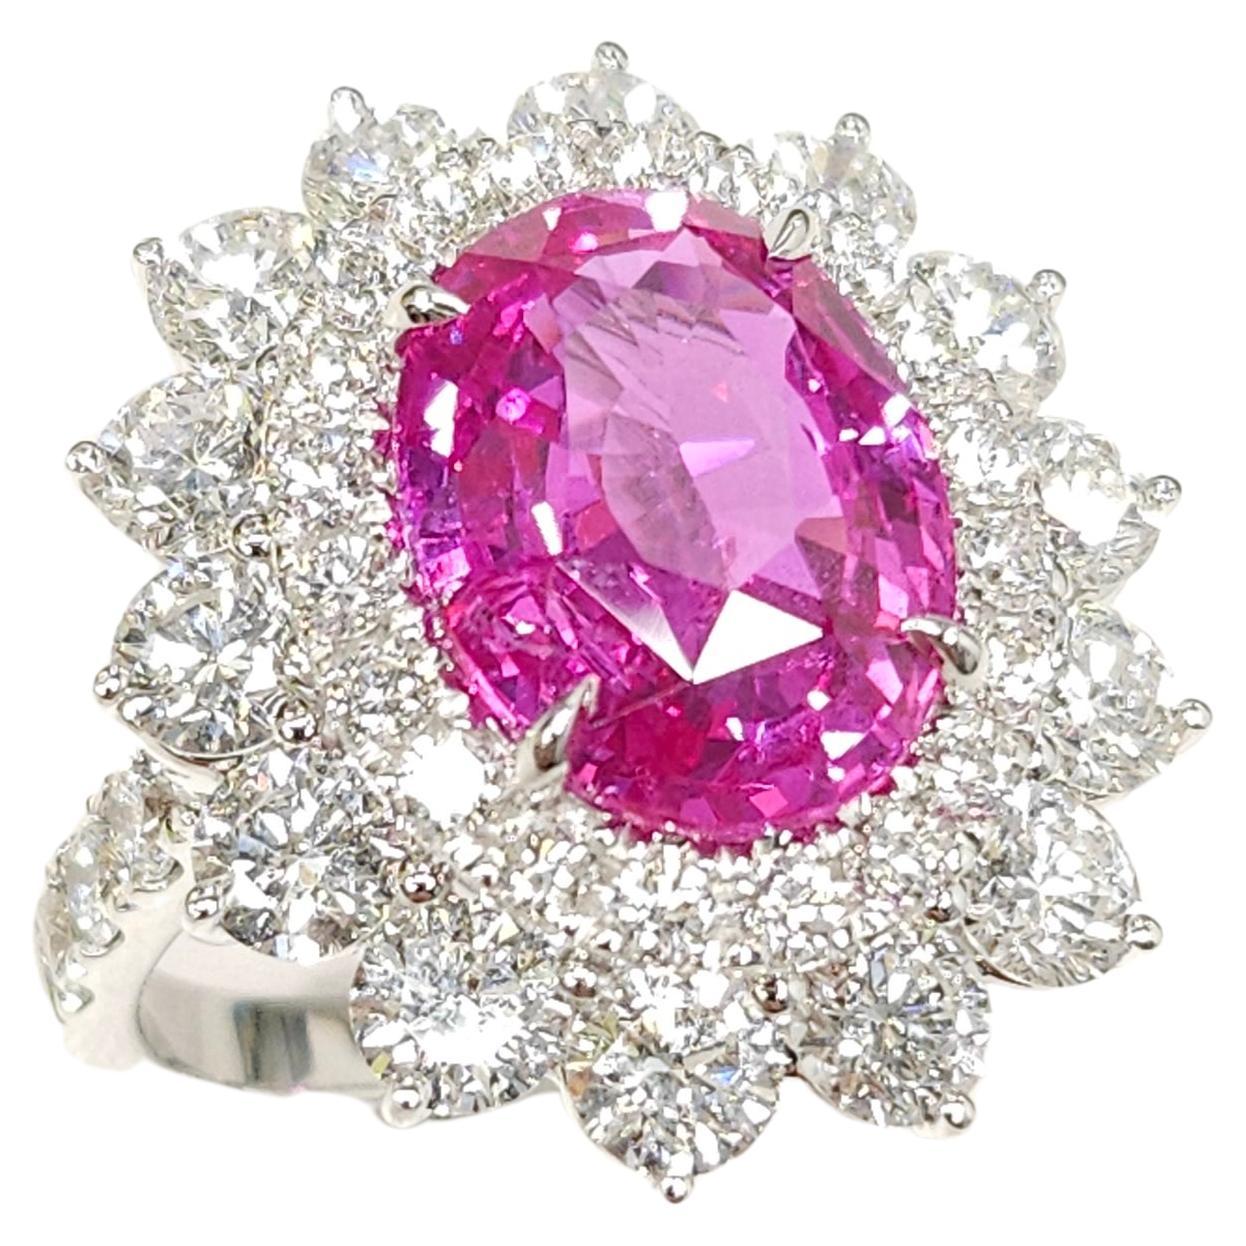 GRS Certified 5.81 Ct Pink Sapphire & 3.59 Ct Diamond Ring in 18K White Gold For Sale